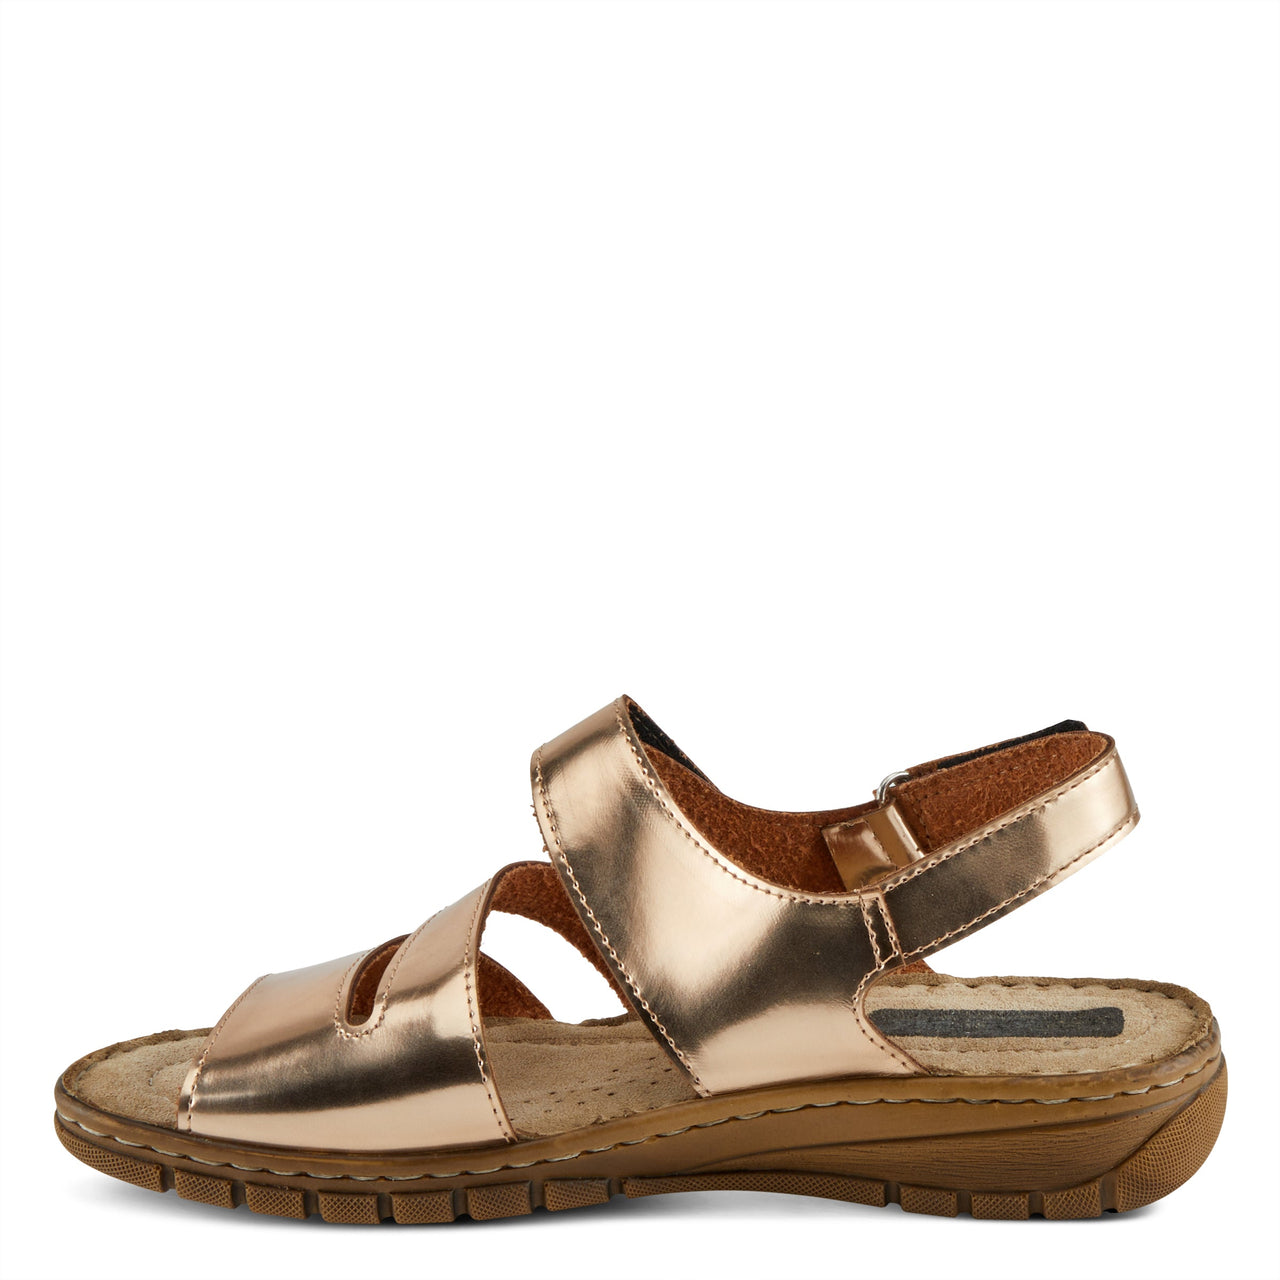 Beautiful Spring Step Shoes Flexus Maera L070 Sandal with comfortable cushioned footbed and stylish design perfect for all-day wear